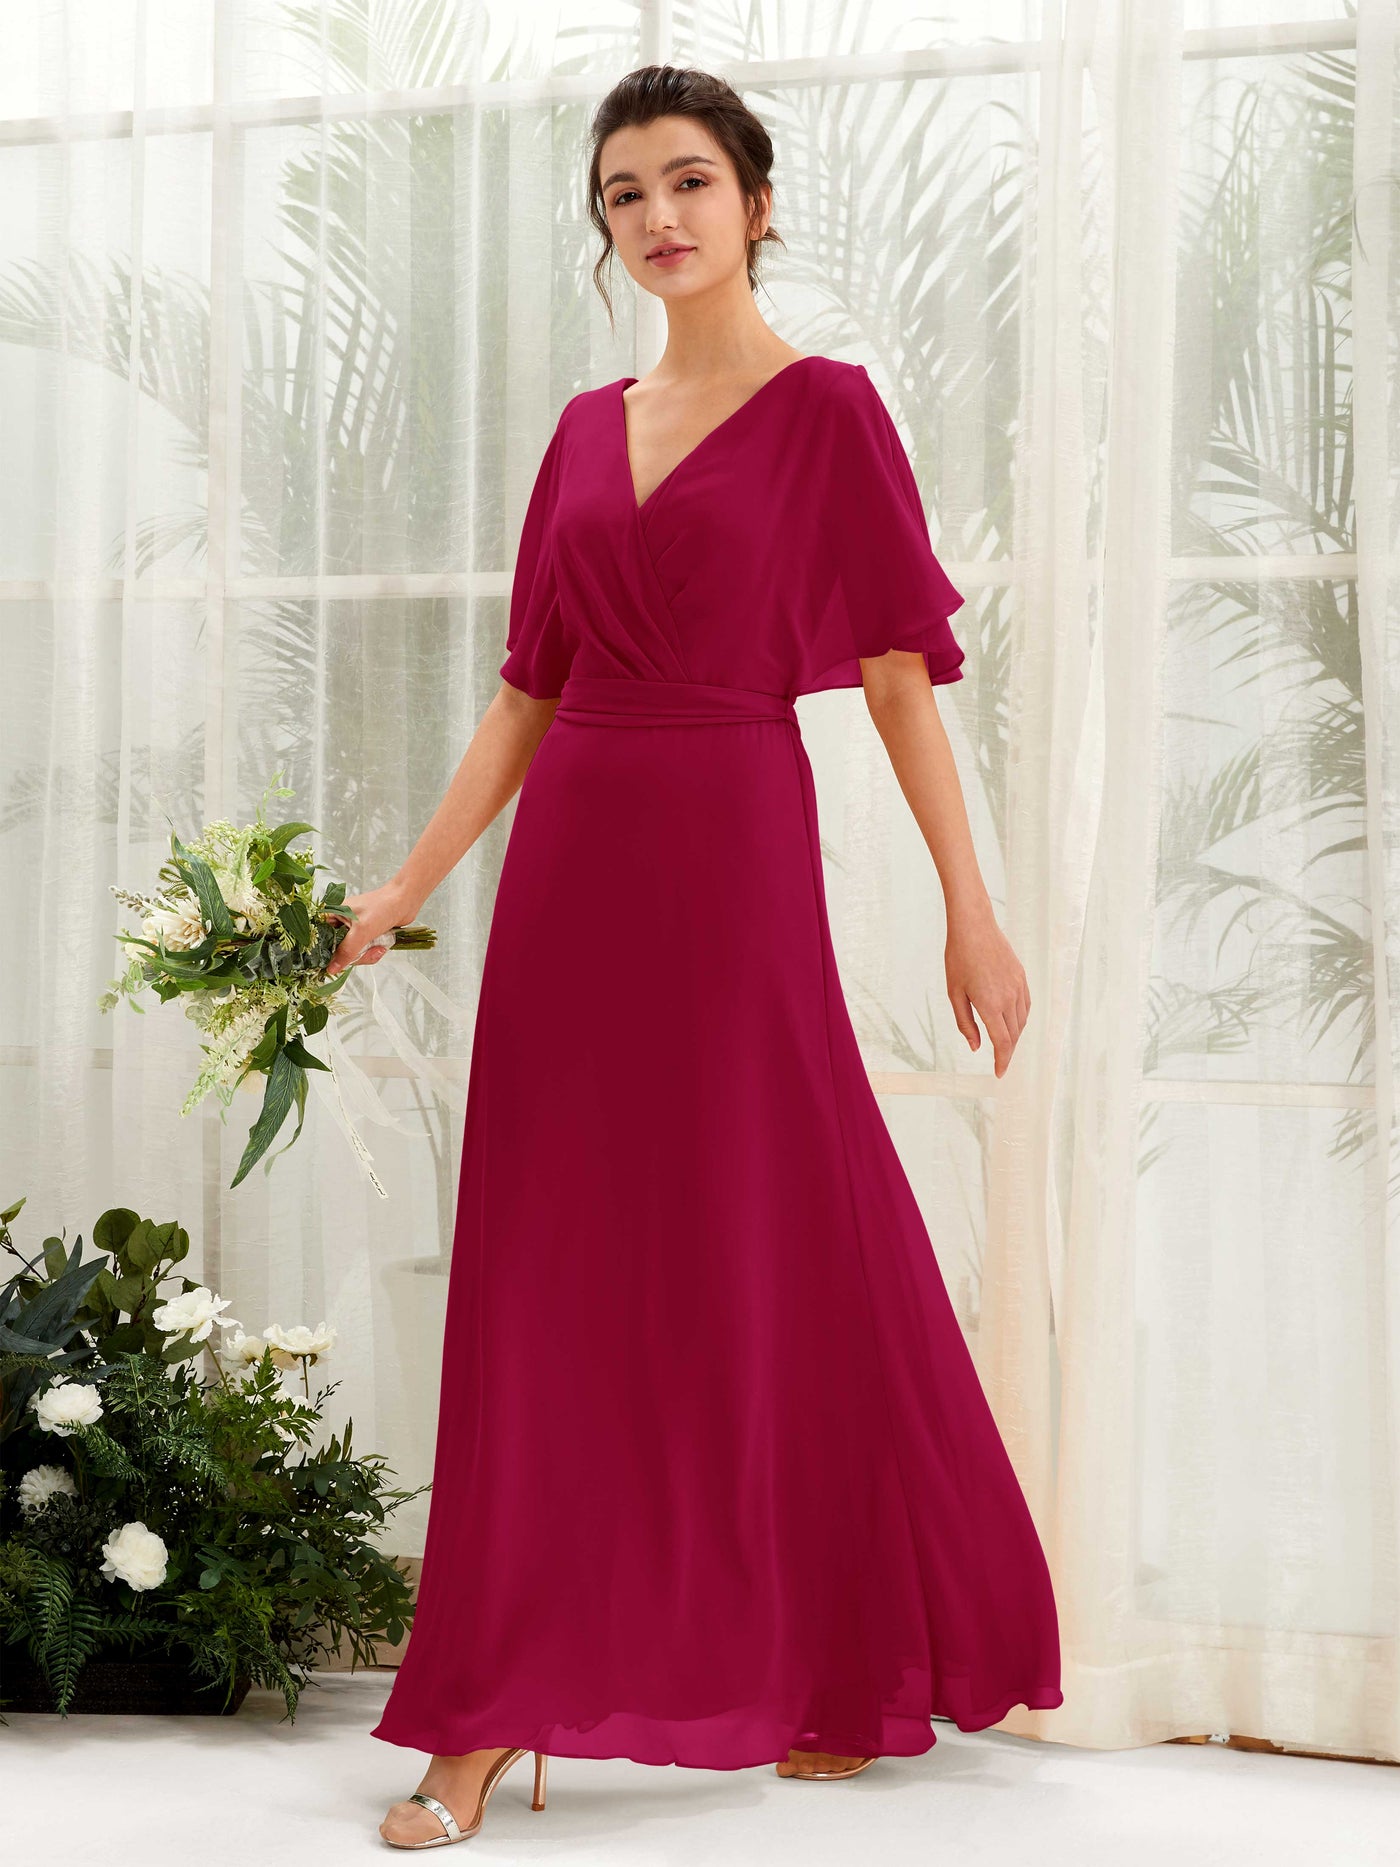 Jester Red Bridesmaid Dresses Bridesmaid Dress A-line Chiffon V-neck Full Length Short Sleeves Wedding Party Dress (81222441)#color_jester-red